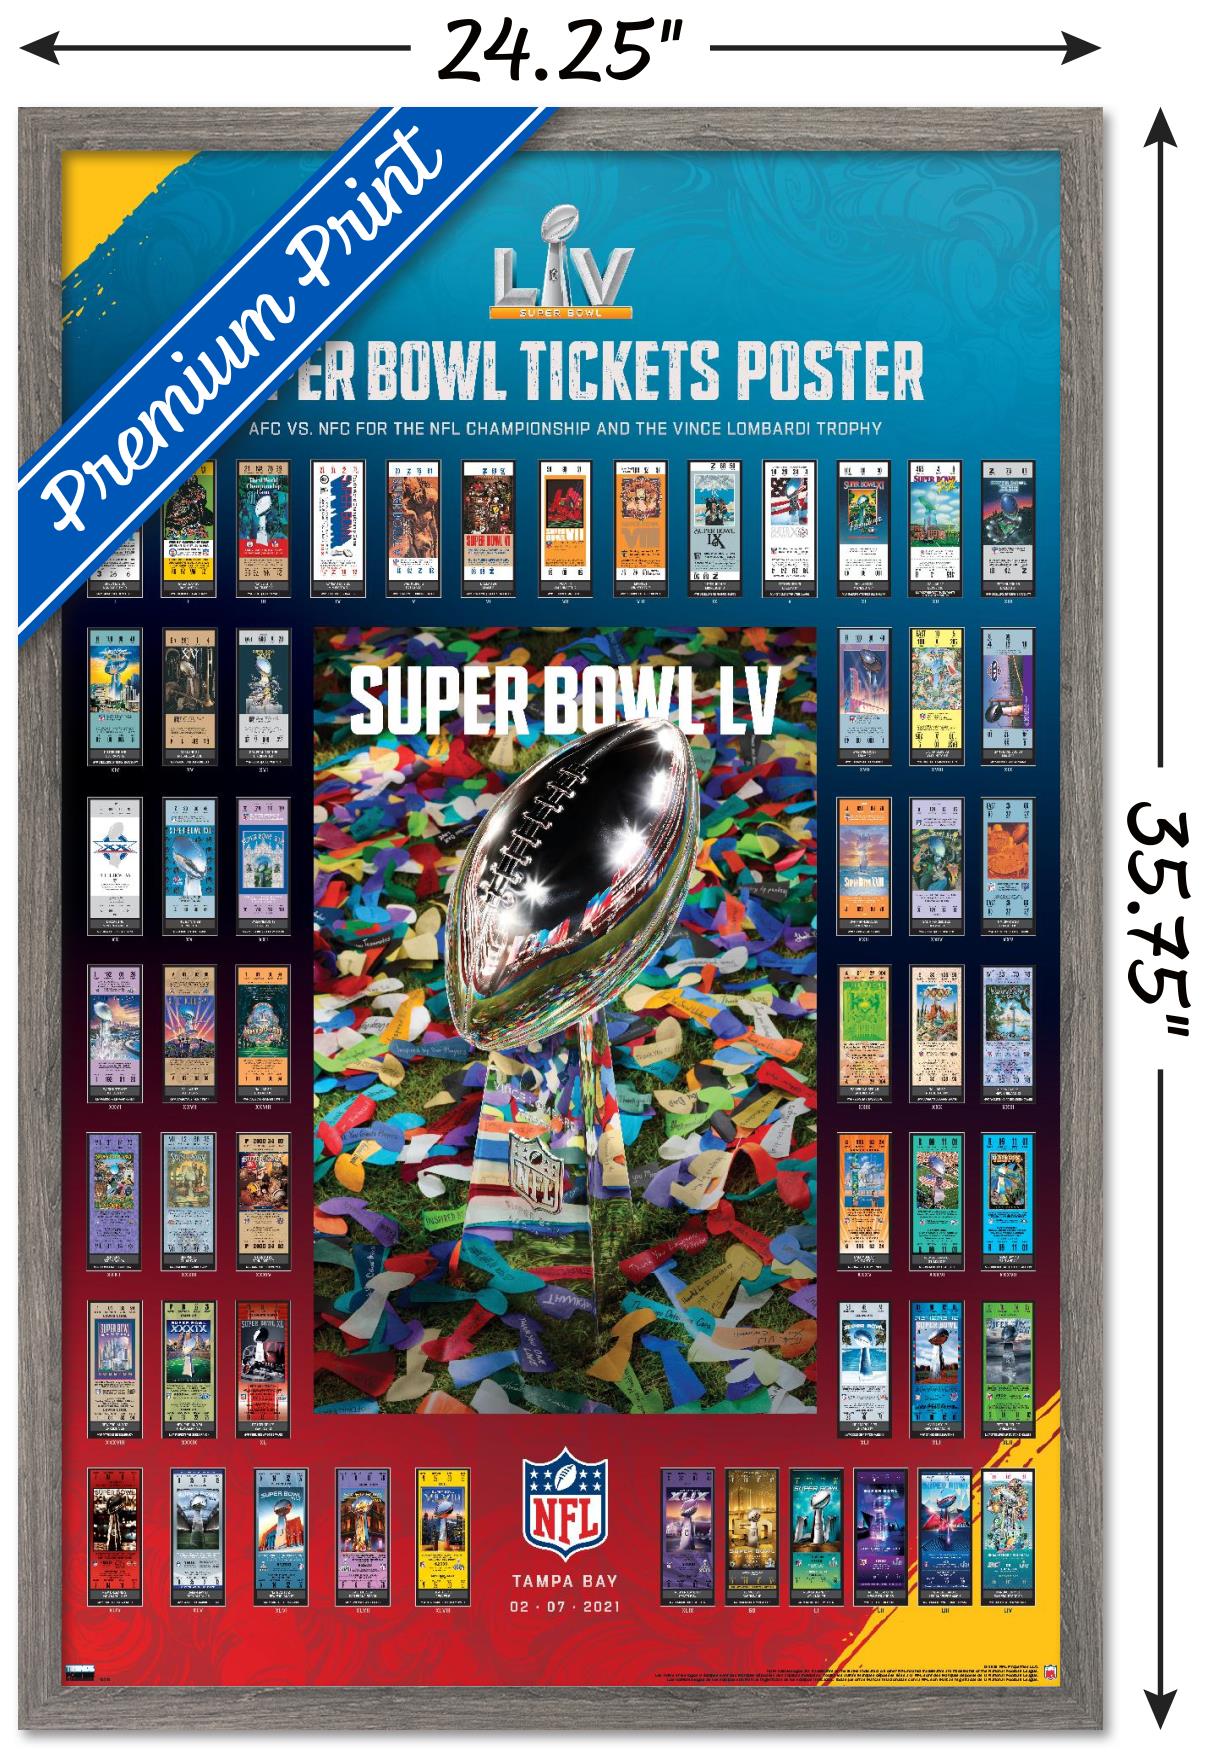 Trends International NFL League - Super Bowl LV - Tickets Wall Poster 24.25" x 35.75" x .75" Barnwood Framed Version - image 3 of 5